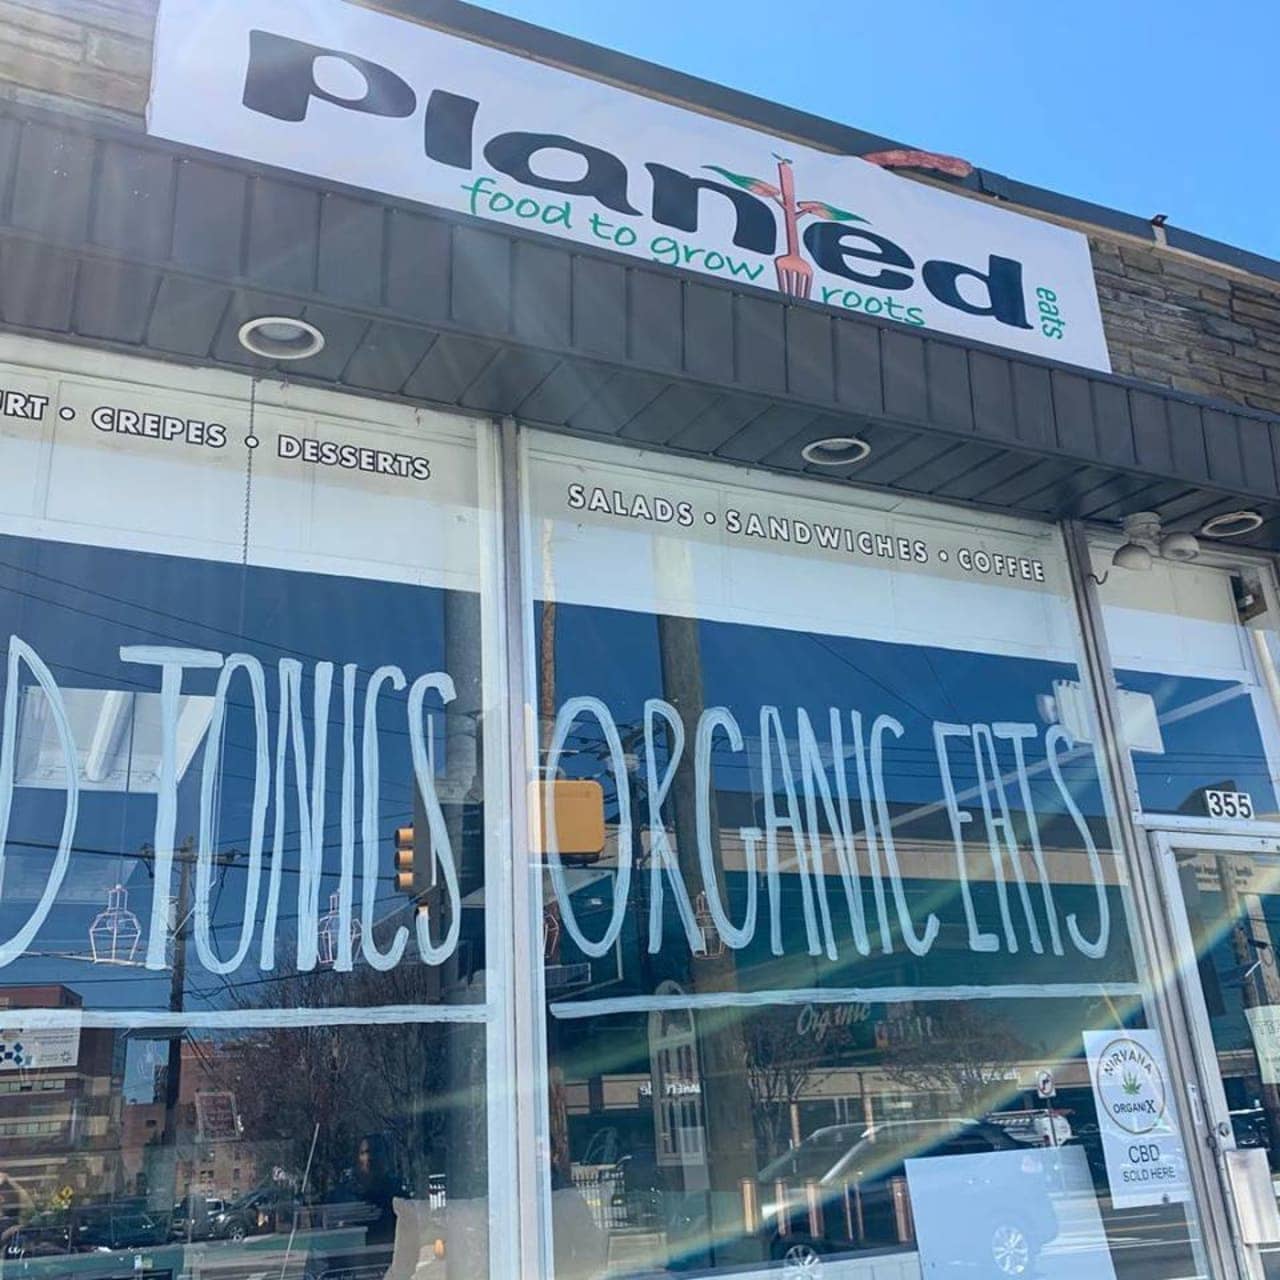 Planted Eats is located at 355 Essex St., Hackensack.